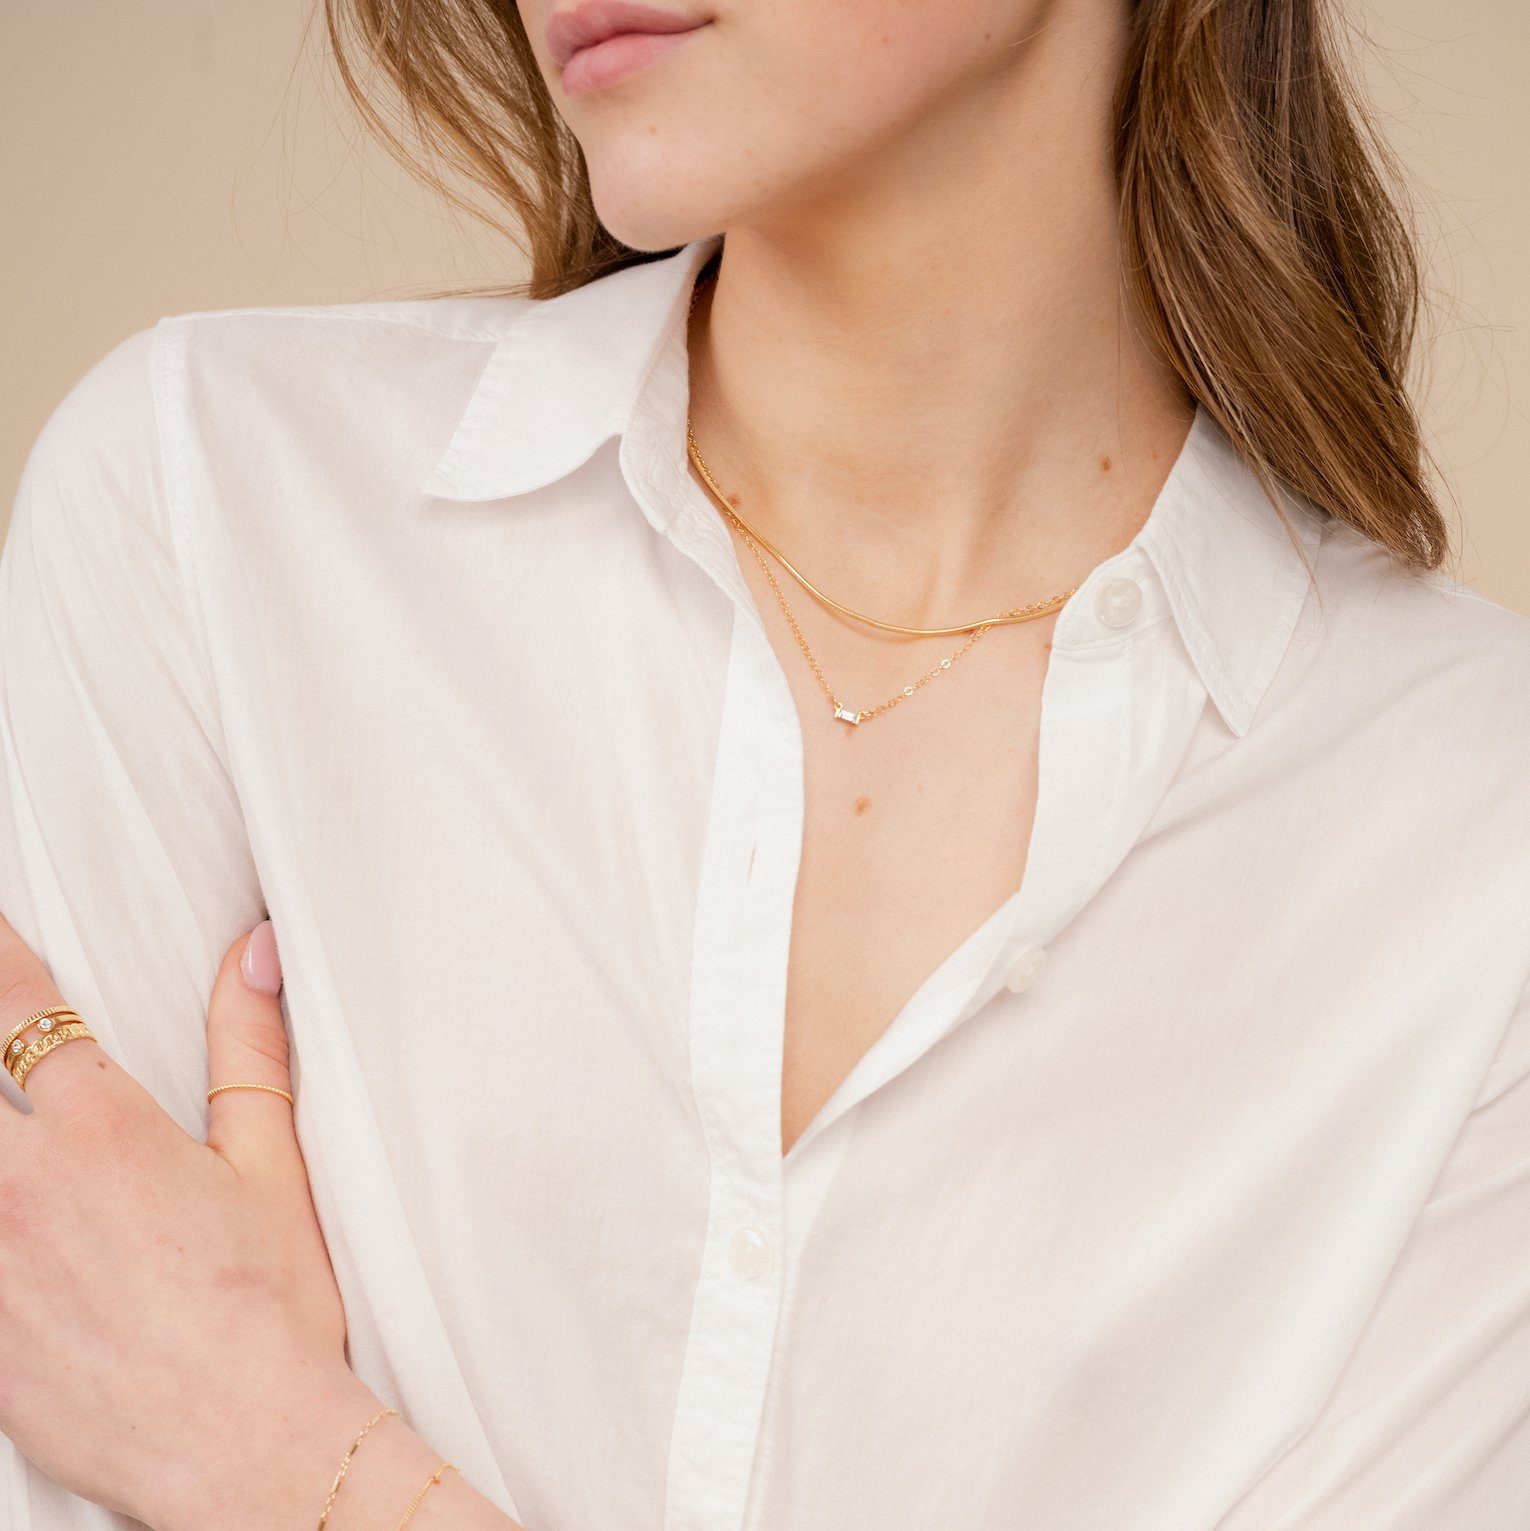 The dainty gold Elegant Necklace Set by Katie Dean Jewelry as seen on a model wearing a white button up collared shirt and dainty gold stacking rings.